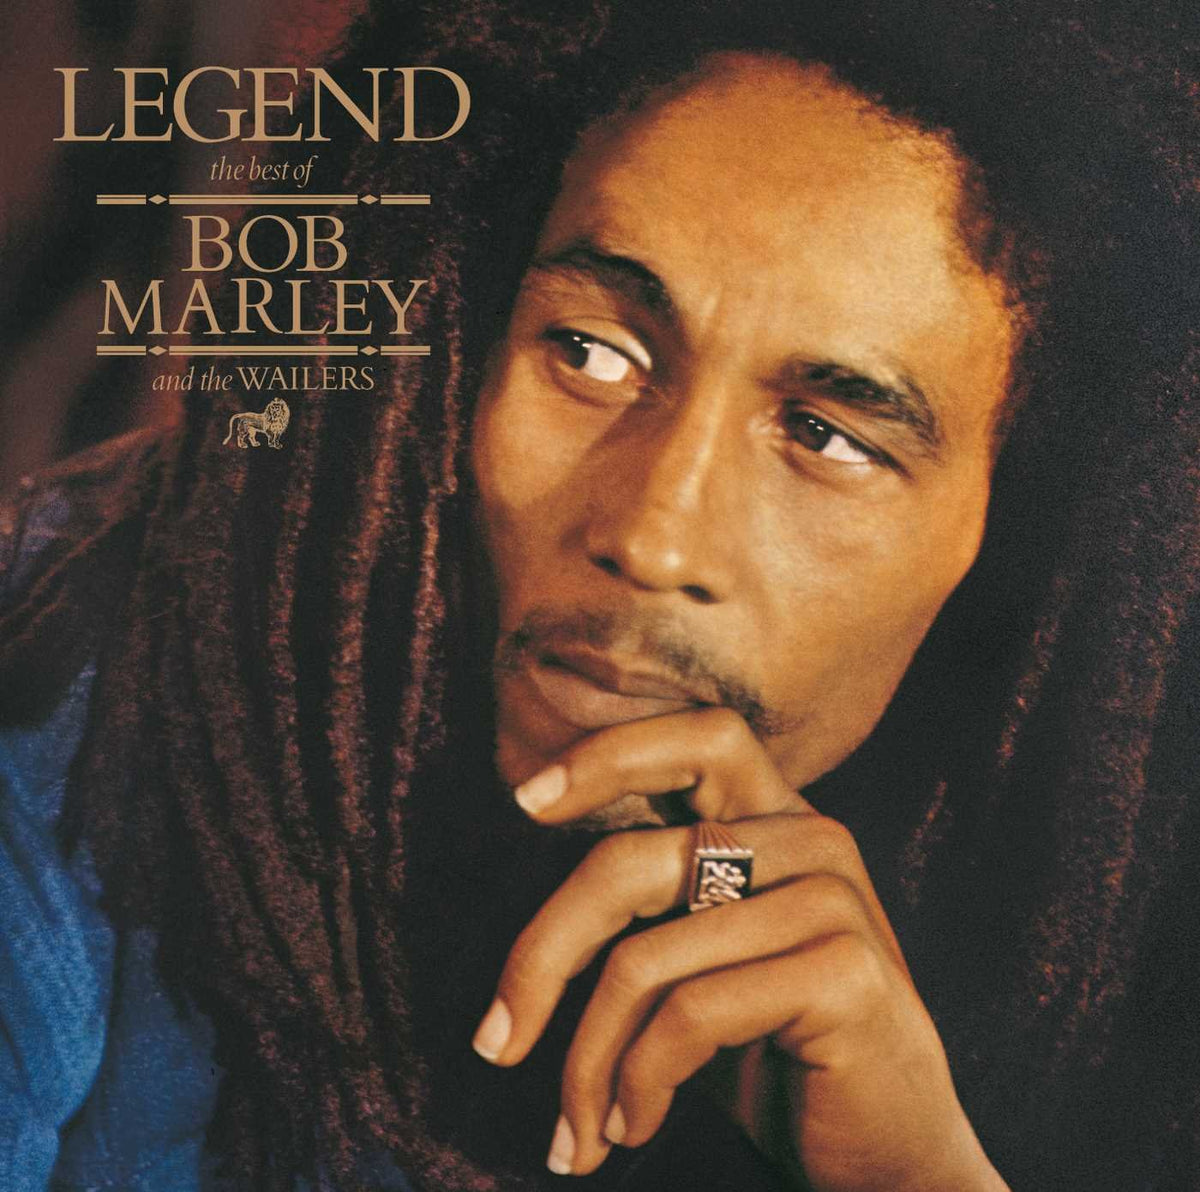 Bob Marley - Legend: The Best Of Bob Marley & The Wailers LP (180g, Remastered)